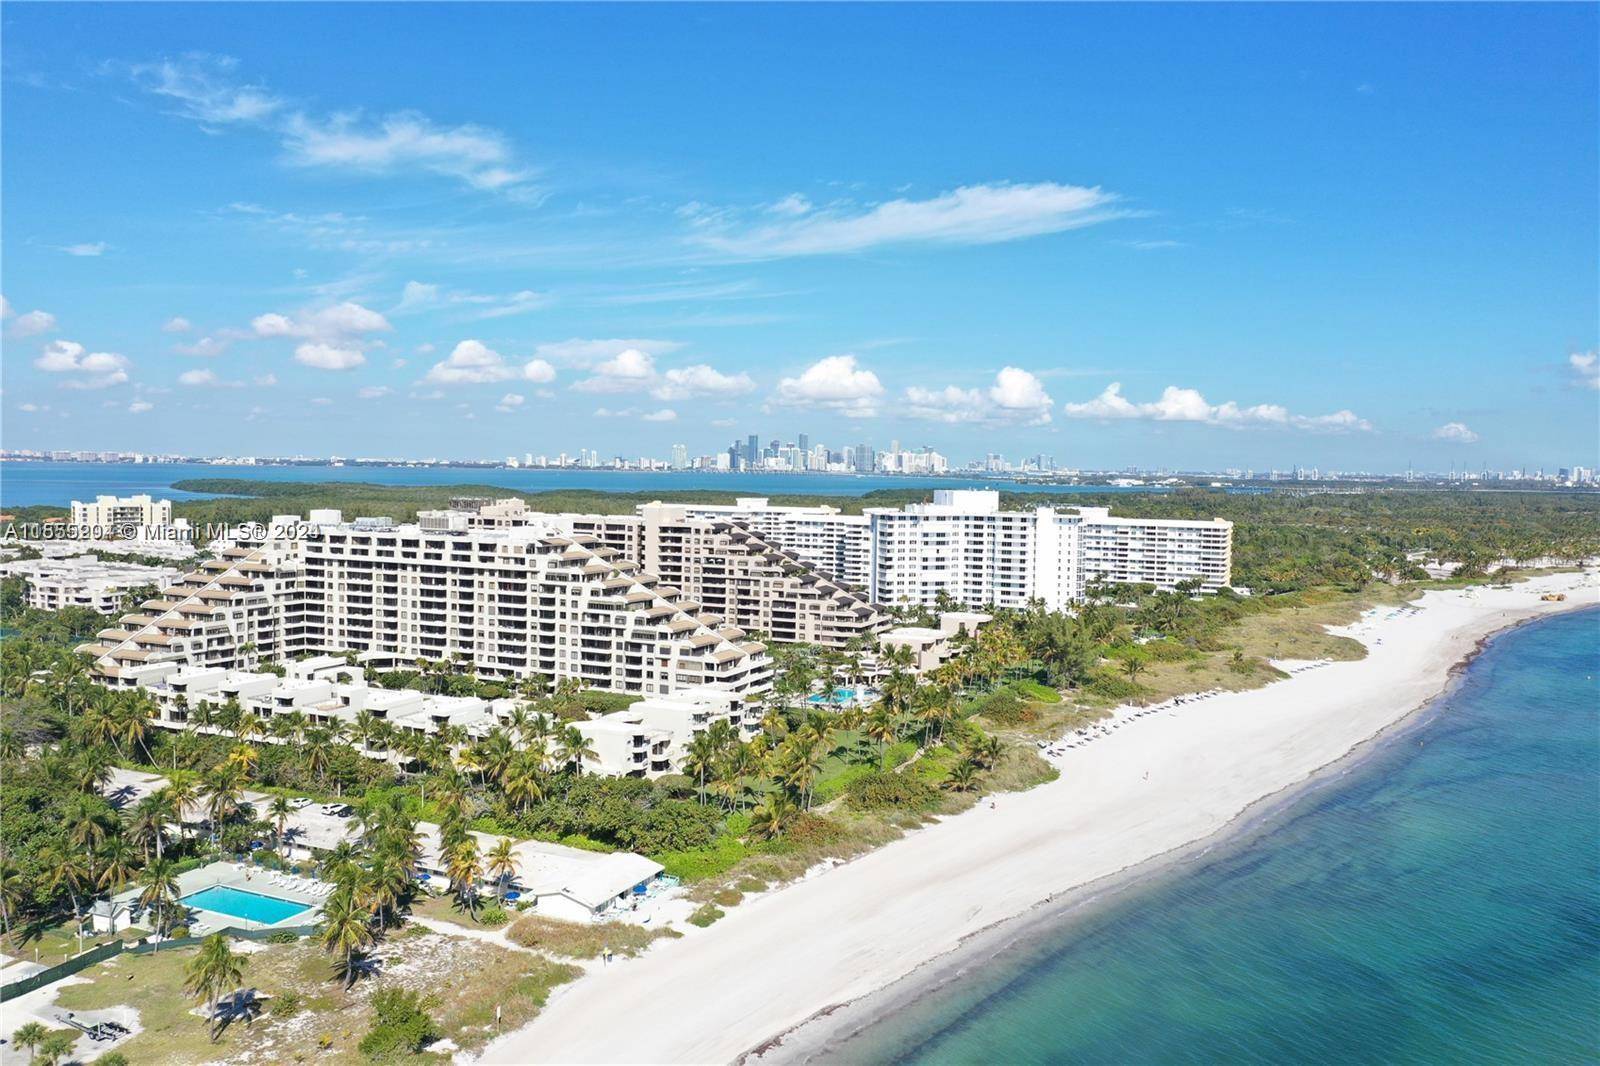 Experience resort style living of coastal luxury with this meticulously remodeled 2 bedroom, 2 bathroom unit in the prestigious Key Colony II Oceansound.